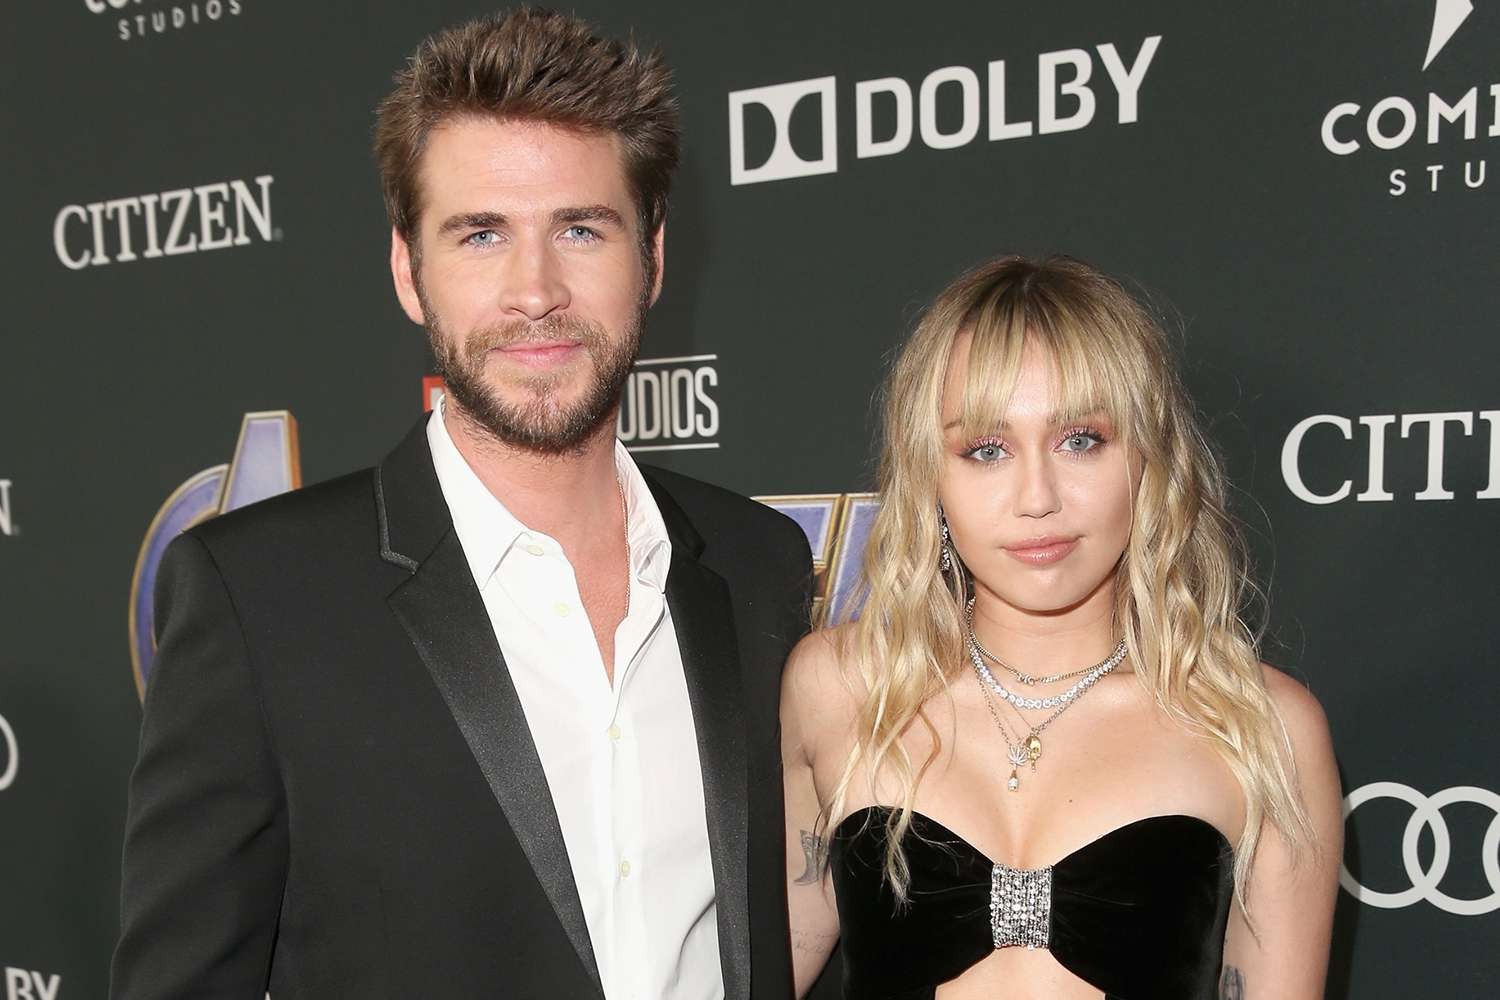 Liam Hemsworth and Miley Cyrus used to date each other.